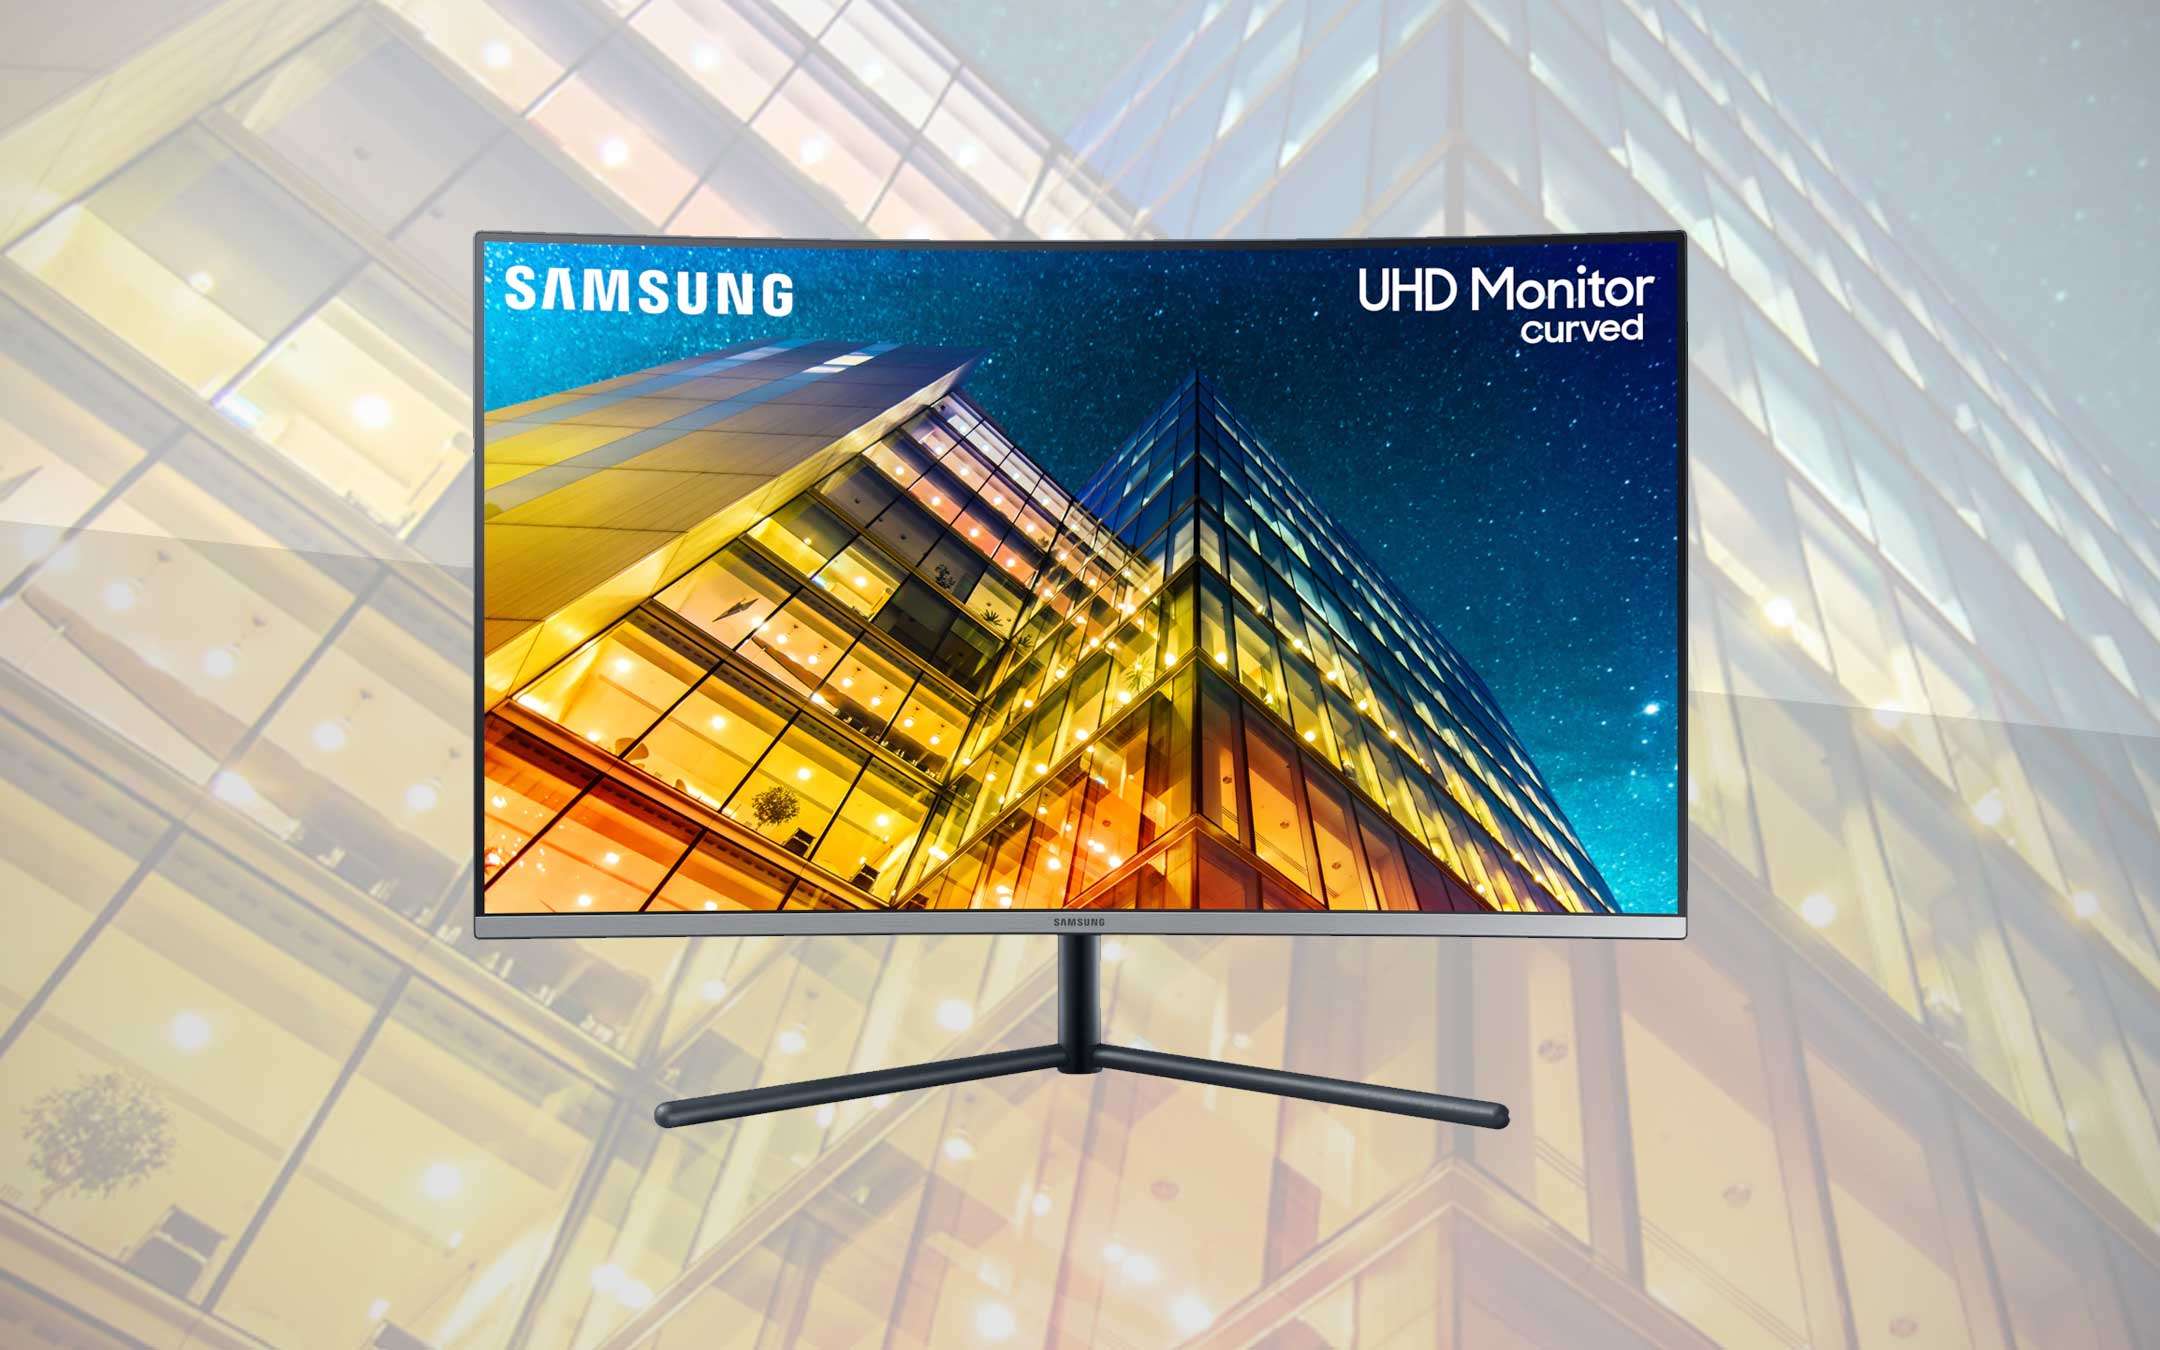 The 32 ”Samsung curved monitor at -25% on Amazon